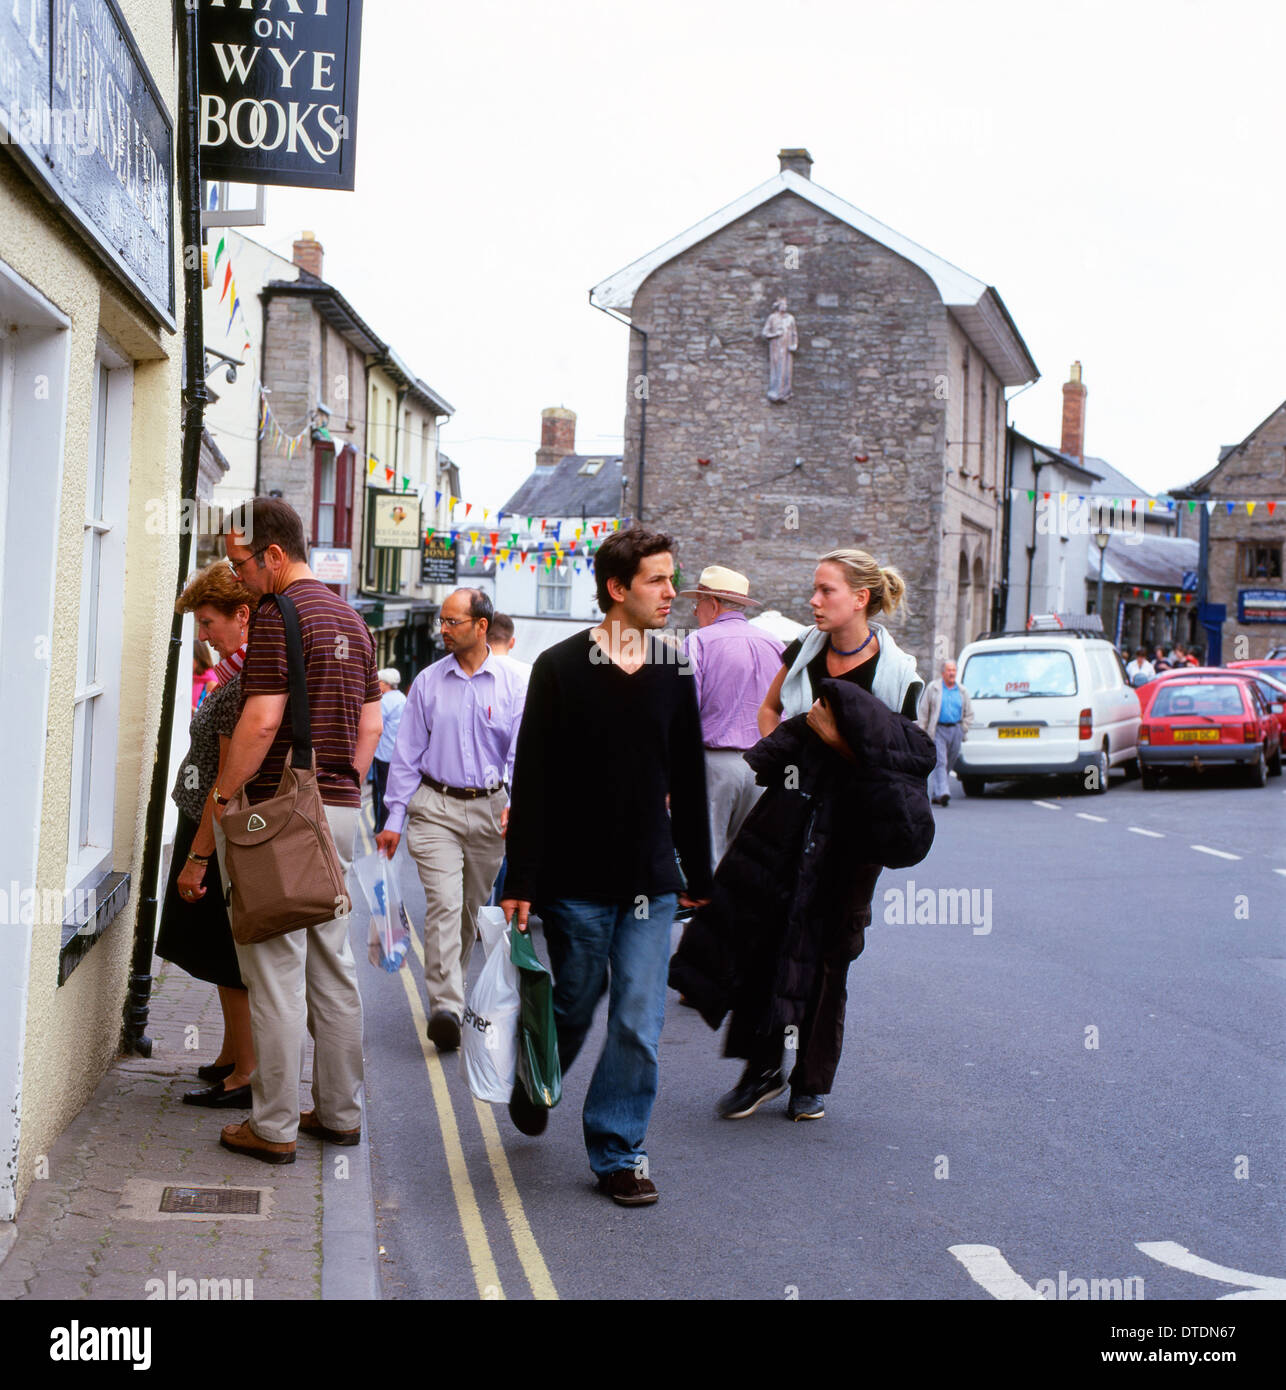 Visitors to Hay-on-Wye stroll past book shops during the Hay Festival of LIterature Wales UK  KATHY DEWITT Stock Photo